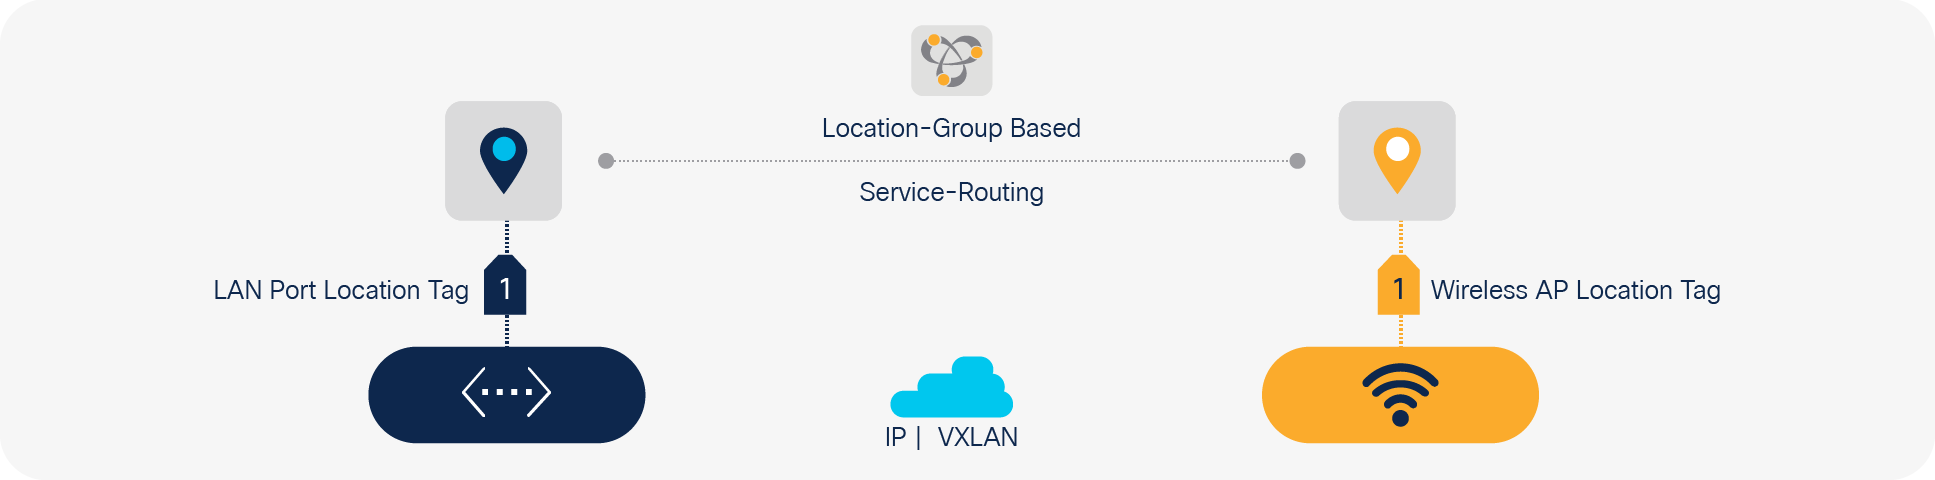 Location-group-based service routing